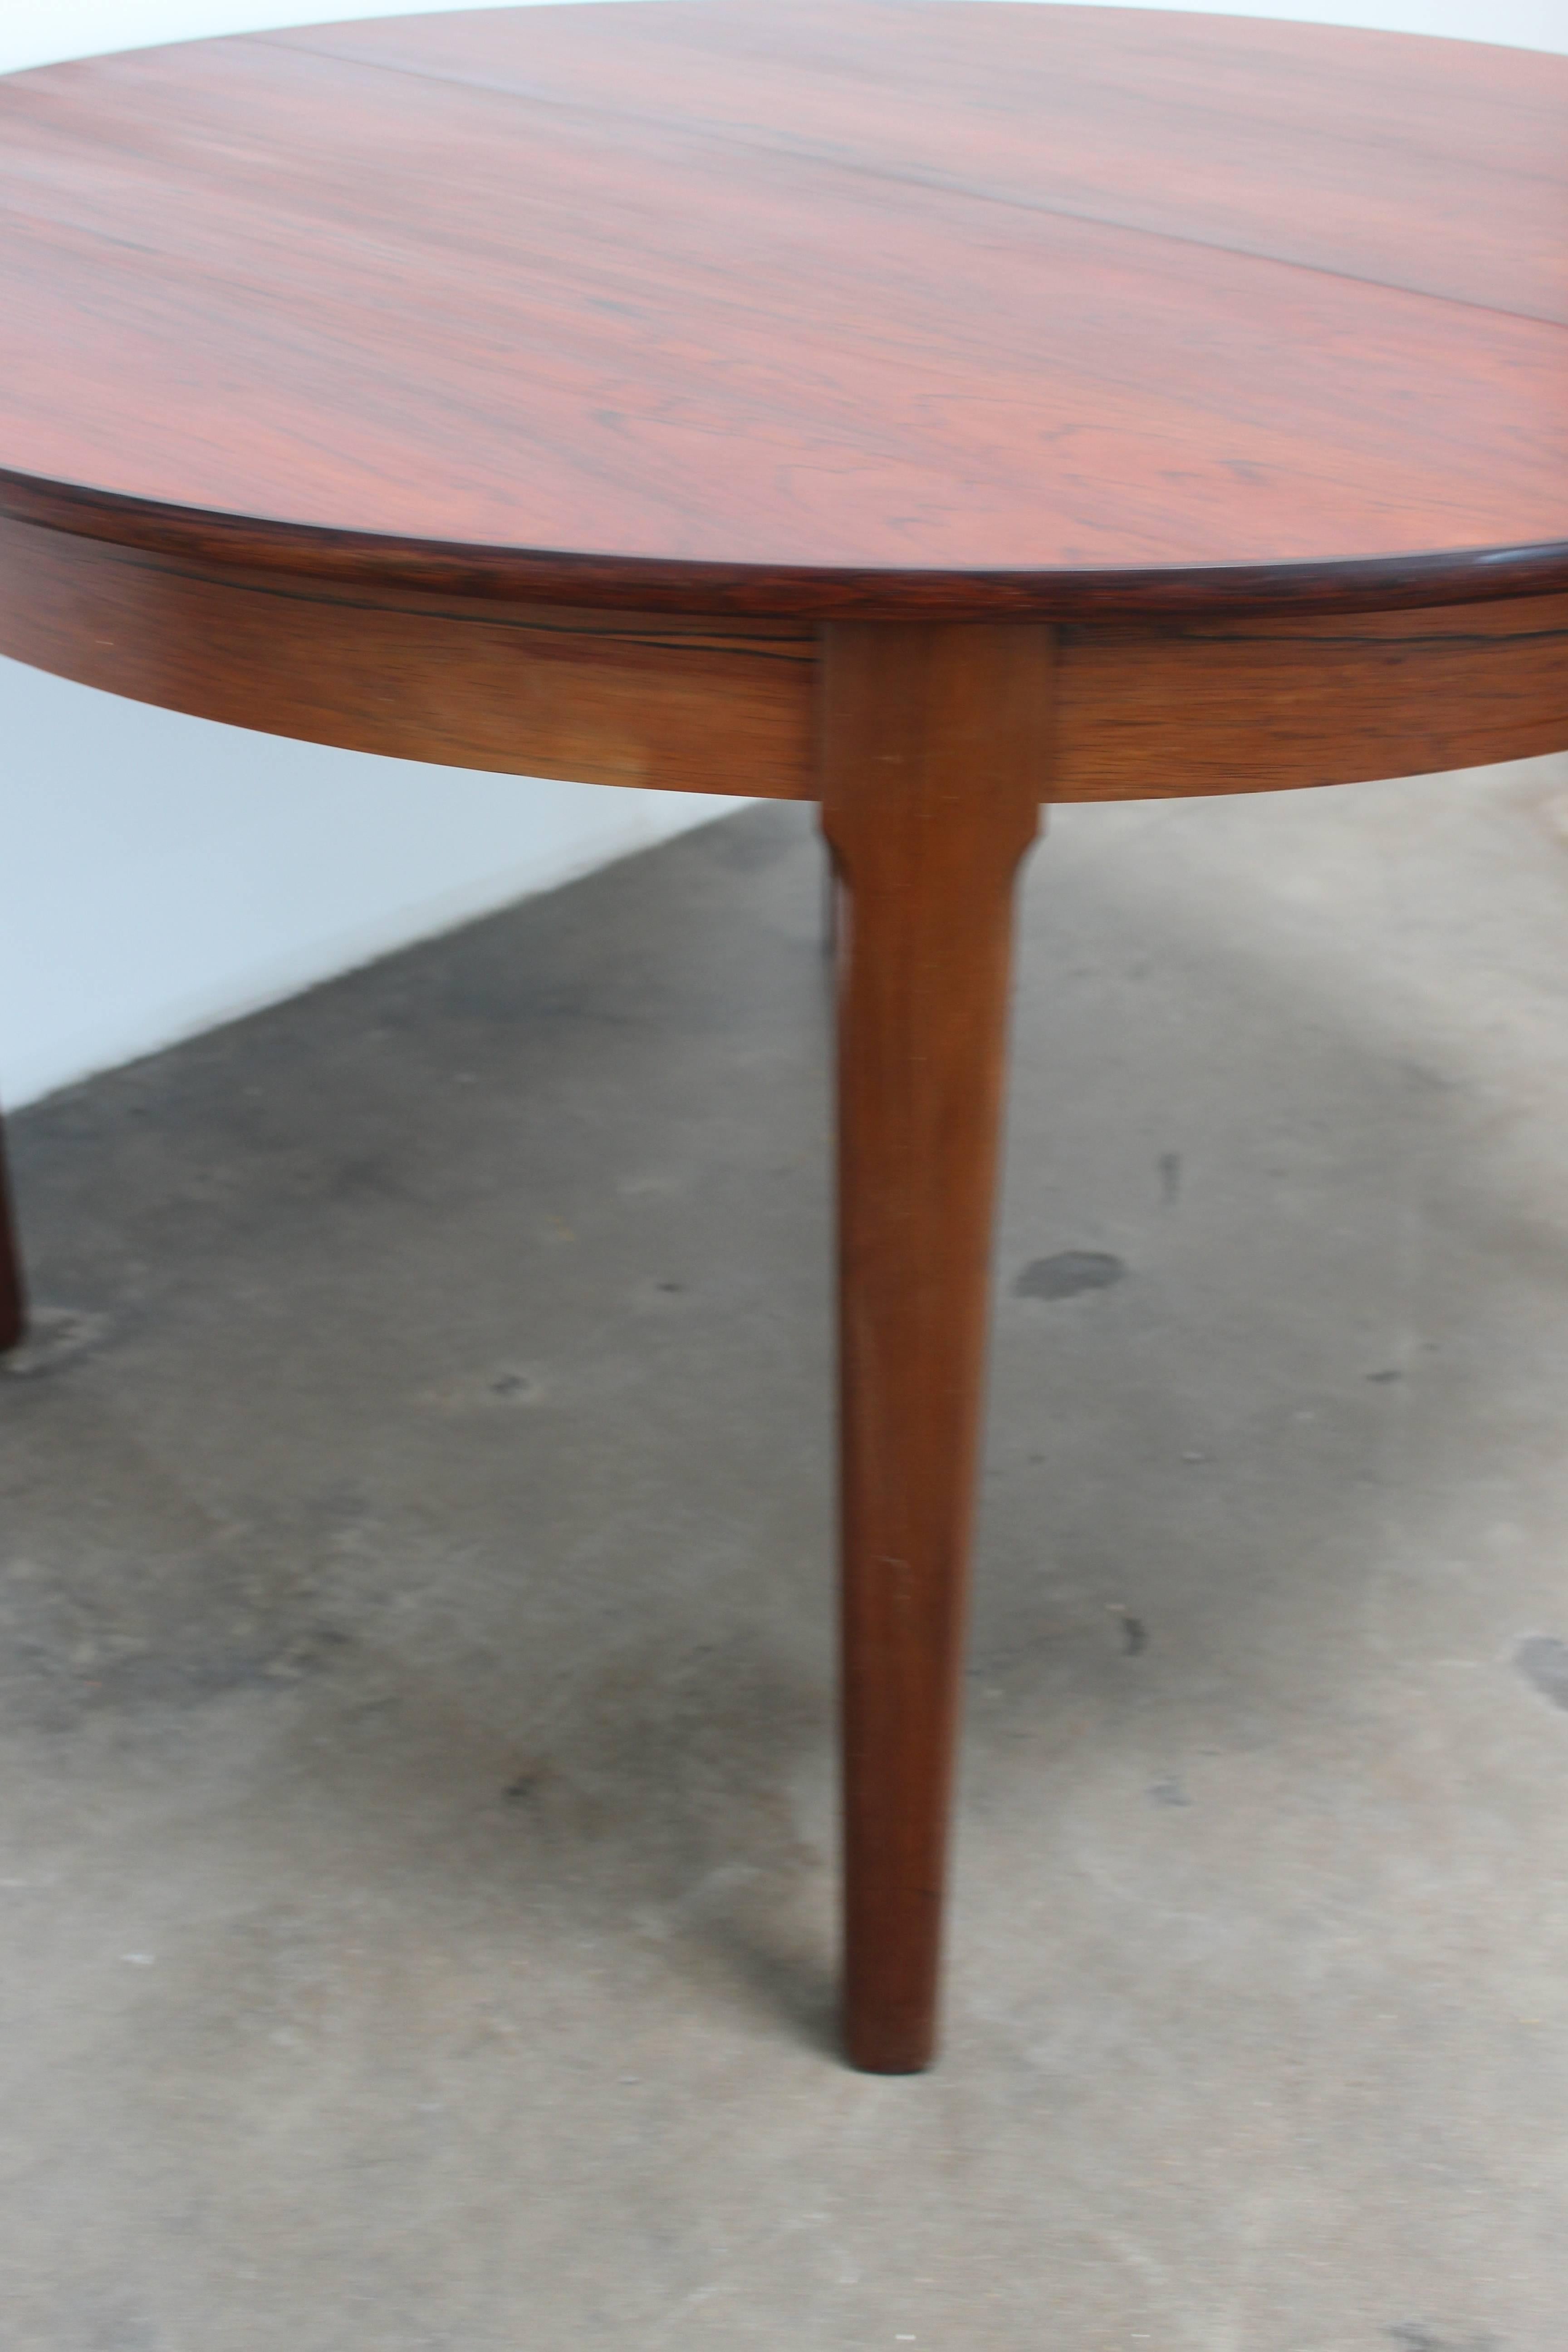 Round Rosewood Dining Table, Scandinavian Modern, circa 1950s In Good Condition For Sale In Houston, TX